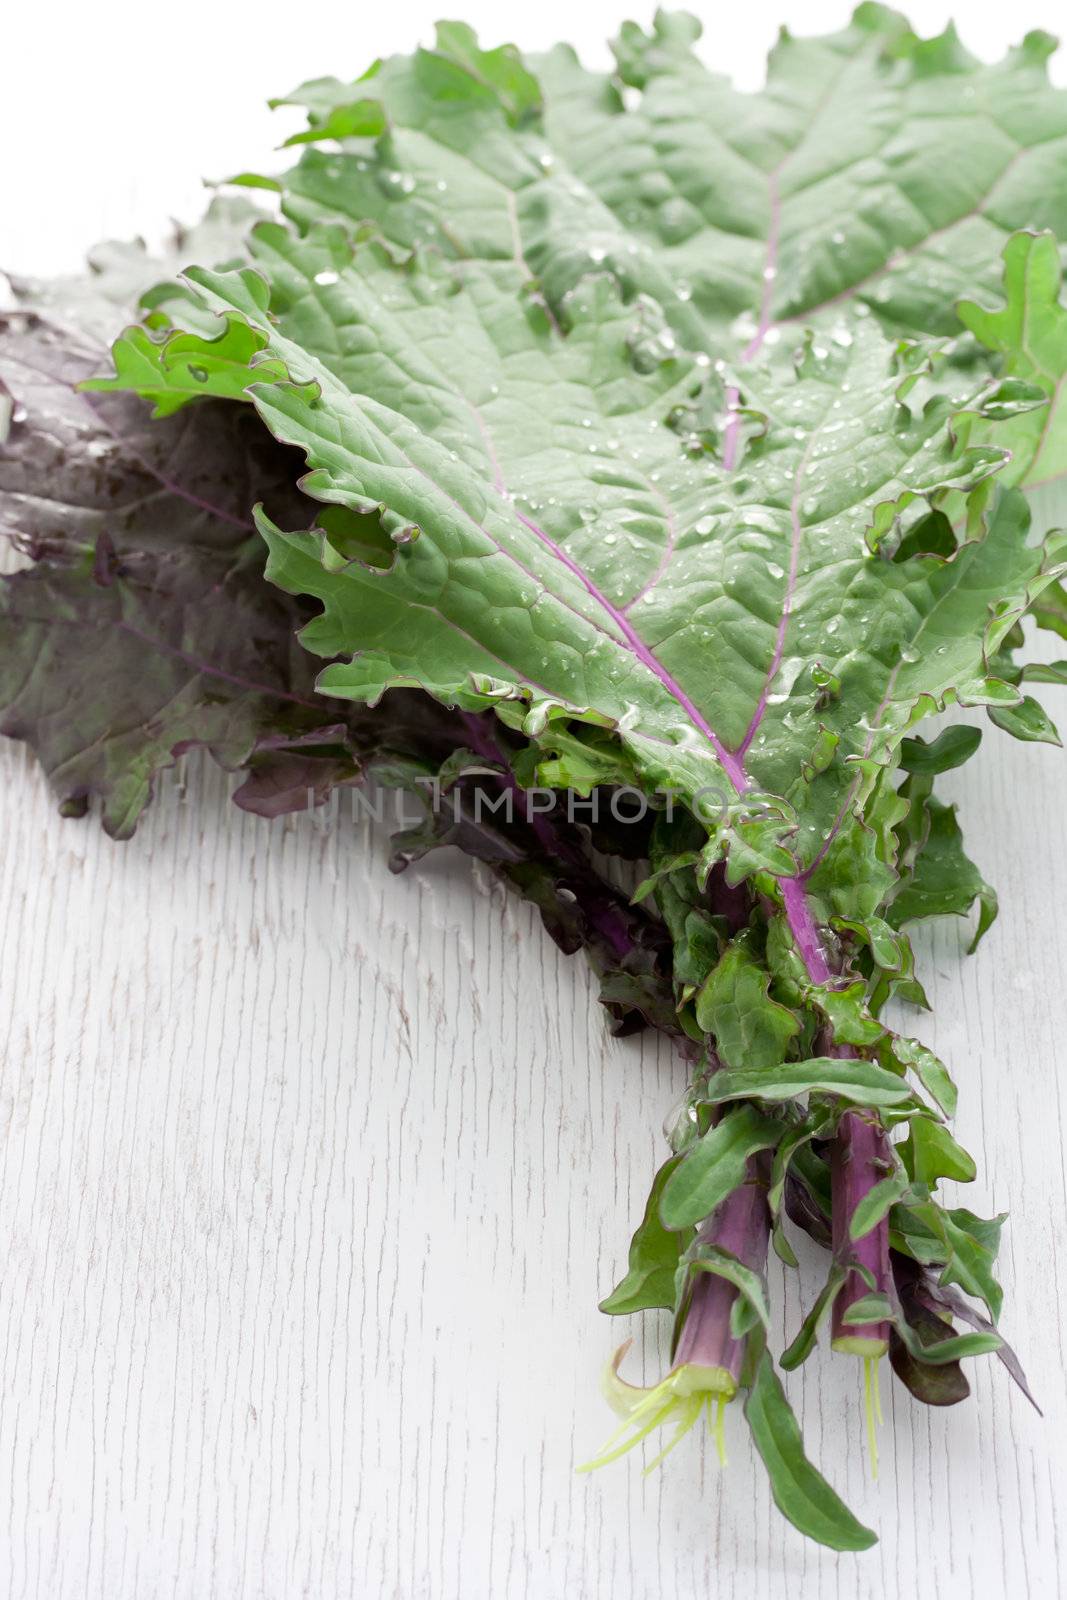 Red kale on white wooden board